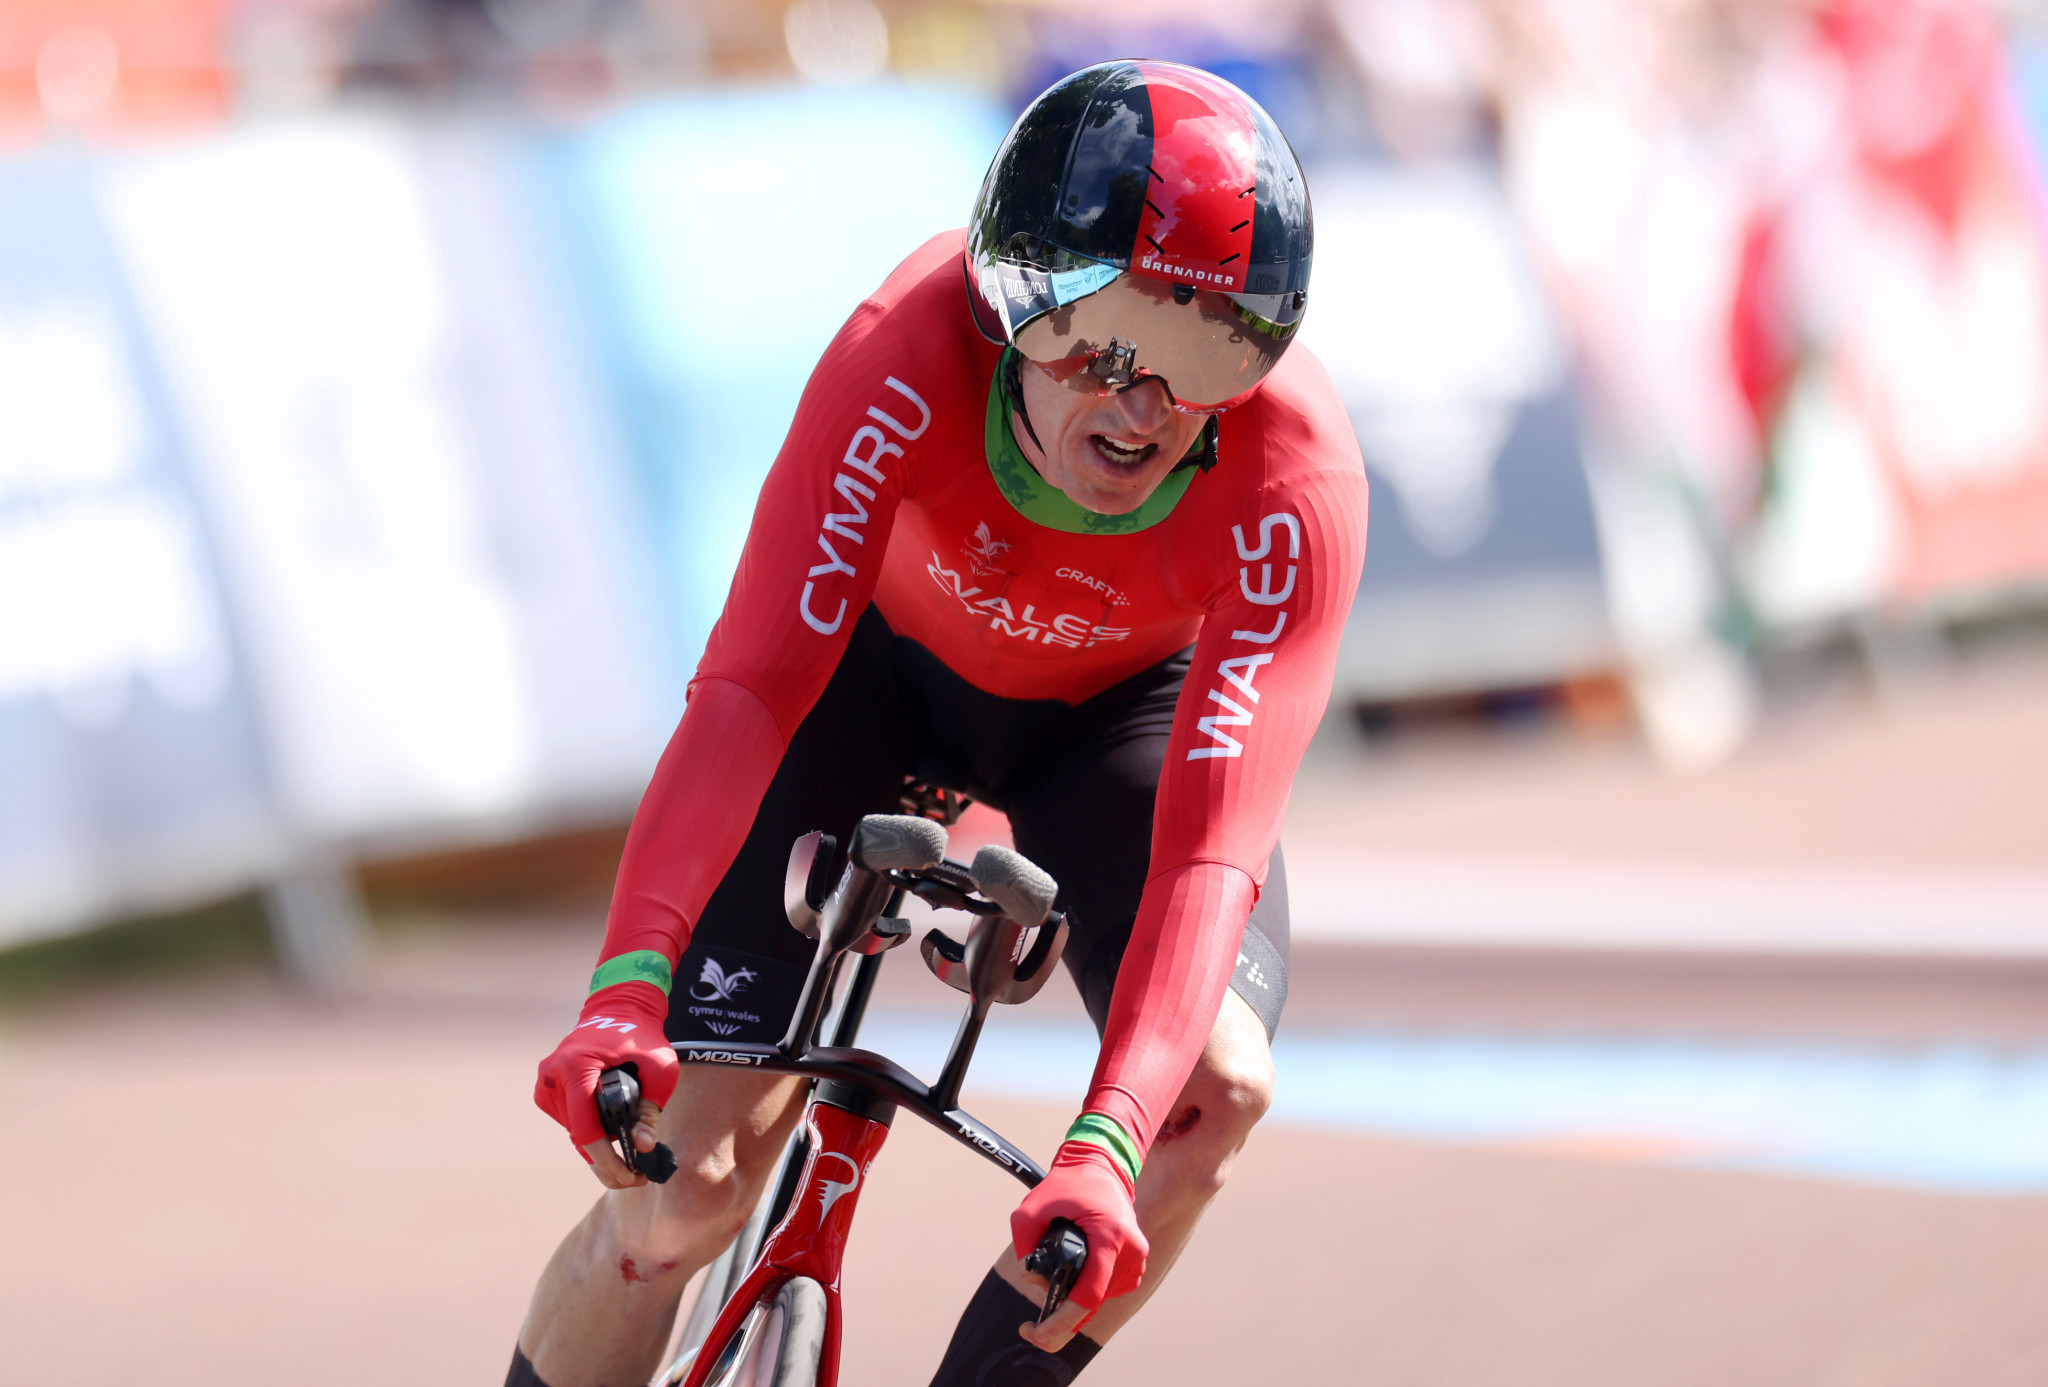 An early fall proved costly to Wales' Geraint Thomas' hopes of men's time trial gold, but he recovered to comfortably secure a place on the podium ©Getty Images